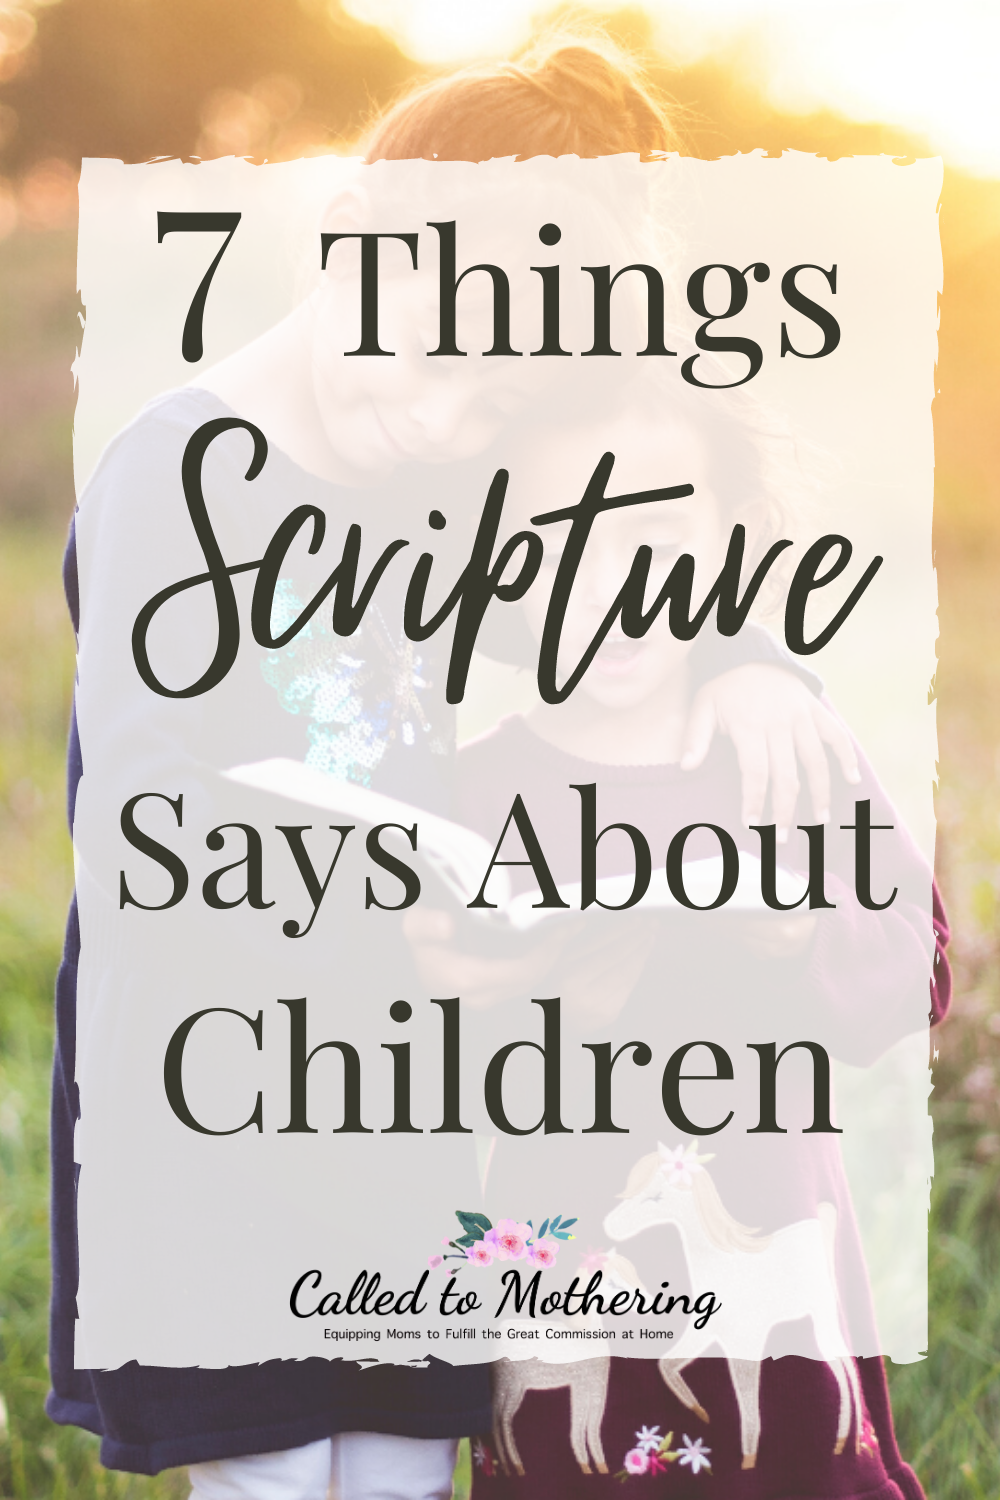 These 7 important things the Bible says about children will profoundly change the way you parent! #christianparenting #biblicalparenting #raisinggodlykids